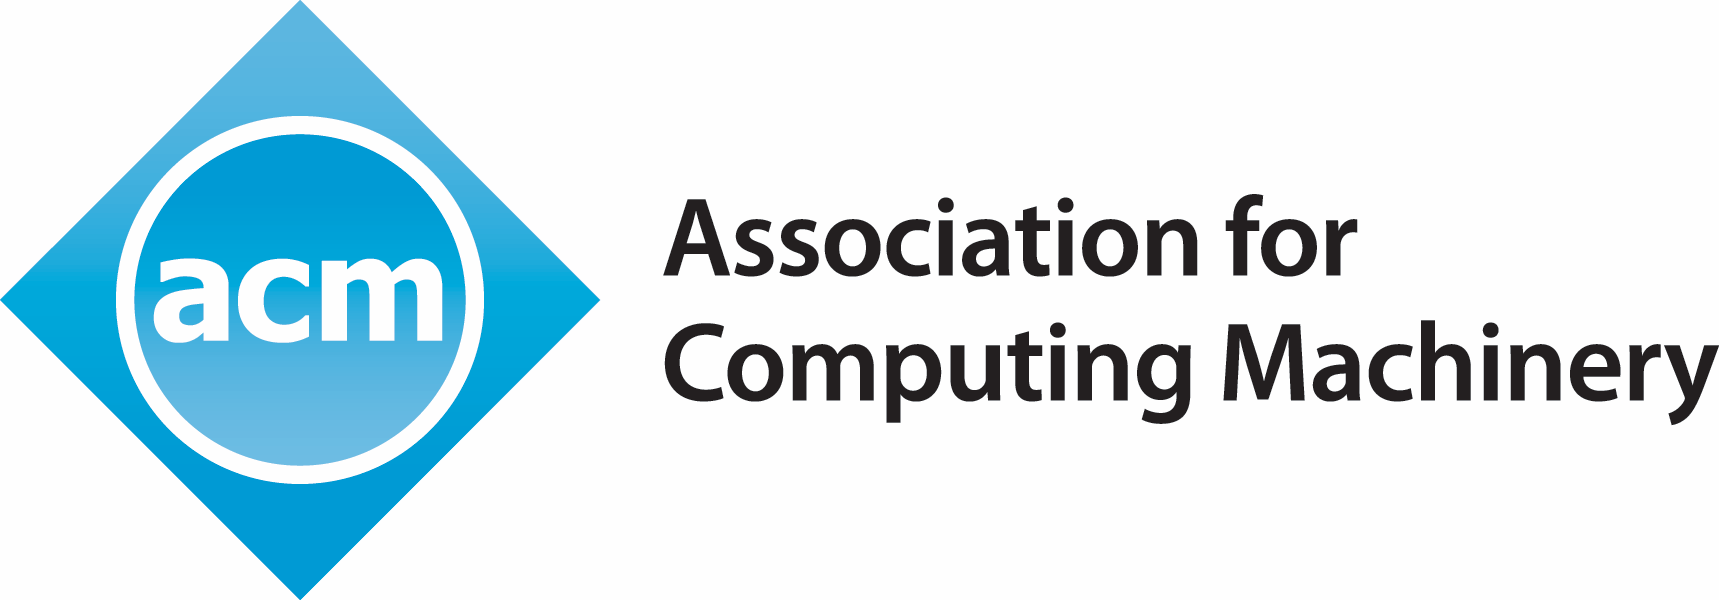 logo for our sponsor ACM, the Association for Computing Machinery